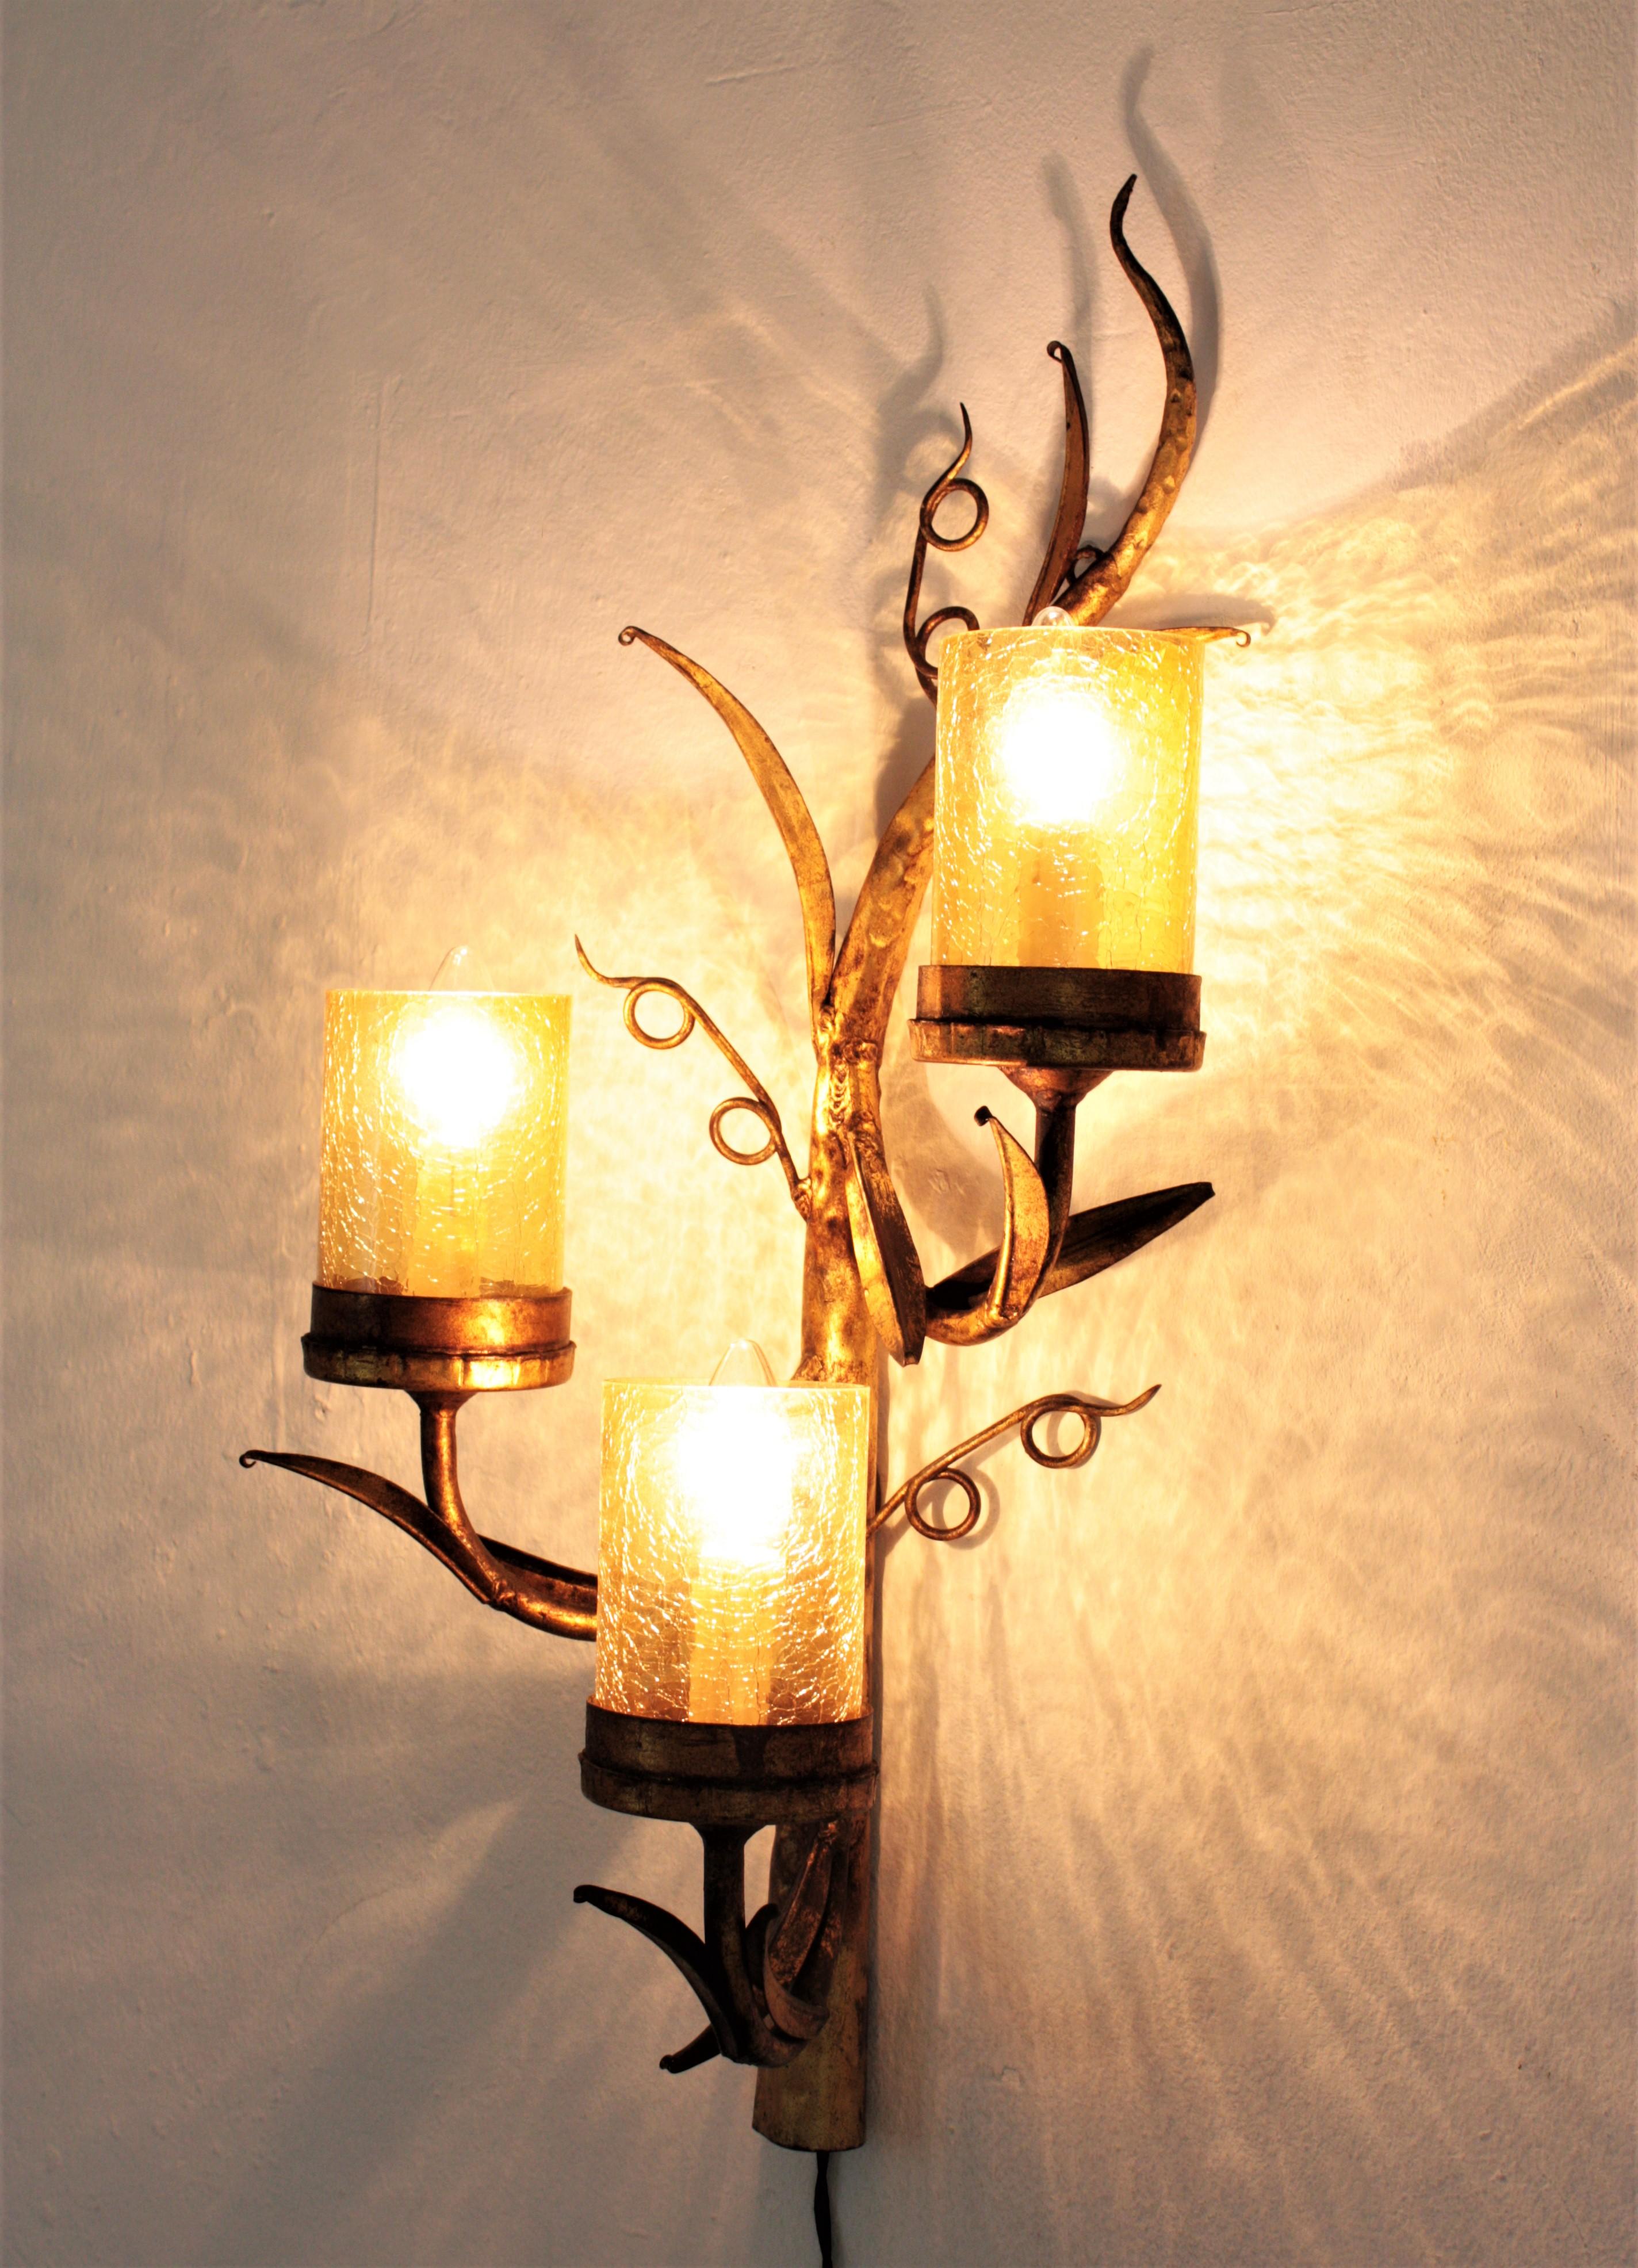 Spanish Branch Wall Sconce in Gilt Iron and Amber Cracked Glass, 1950s For Sale 2